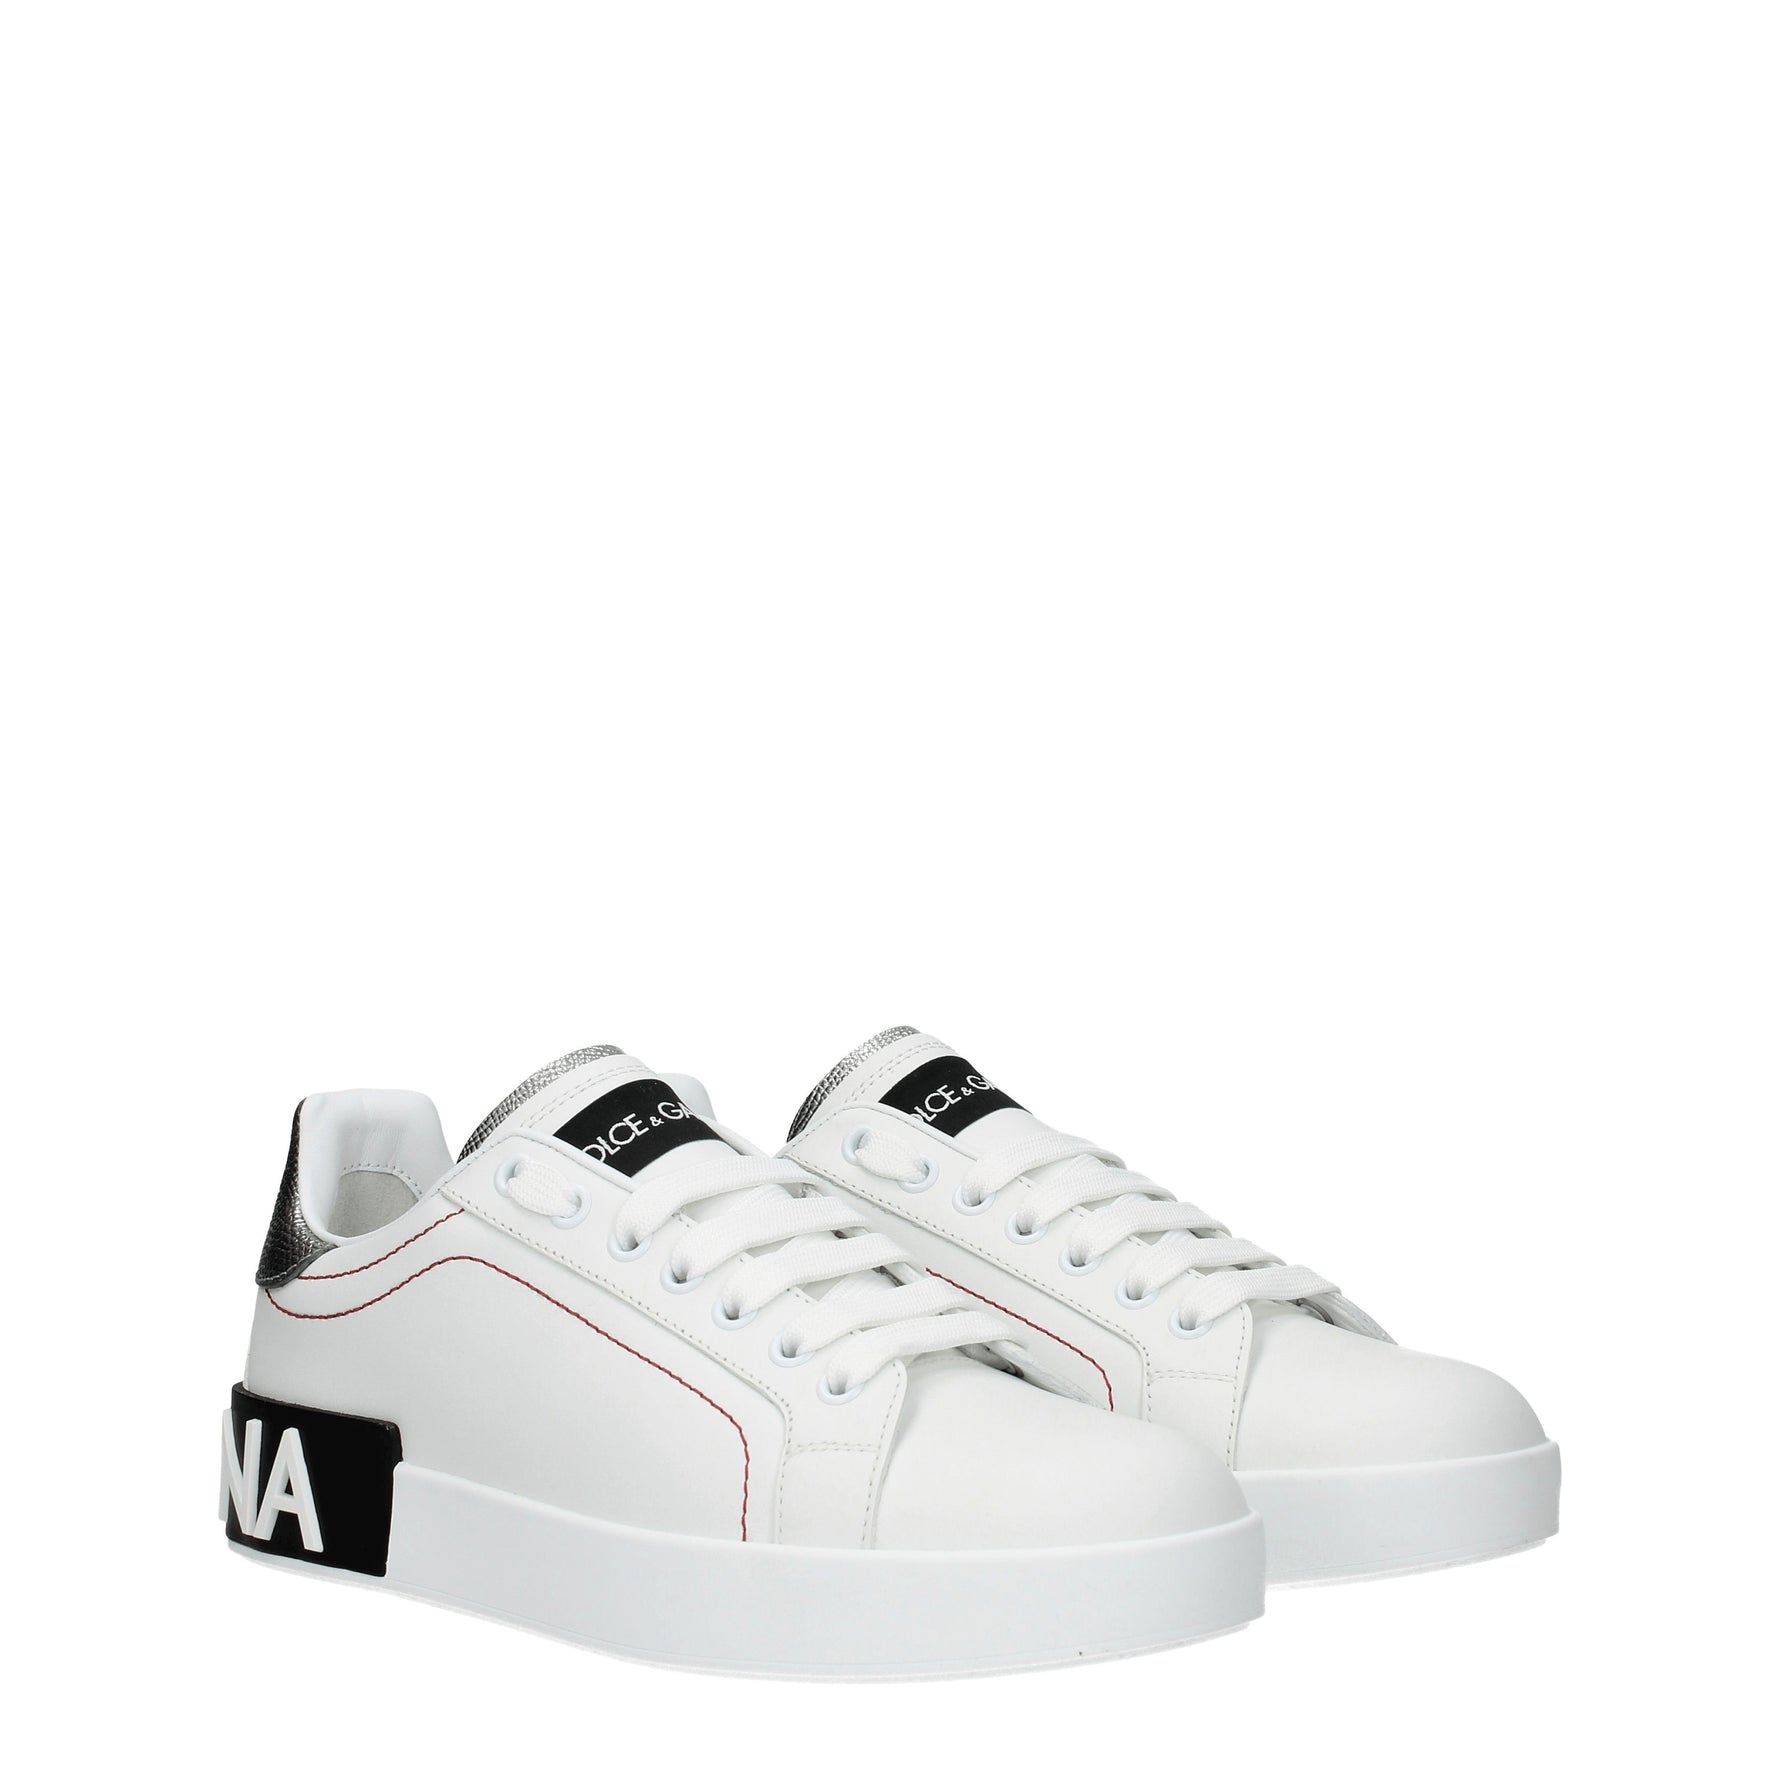 Dolce&Gabbana Sneakers Donna Pelle Bianco Argento